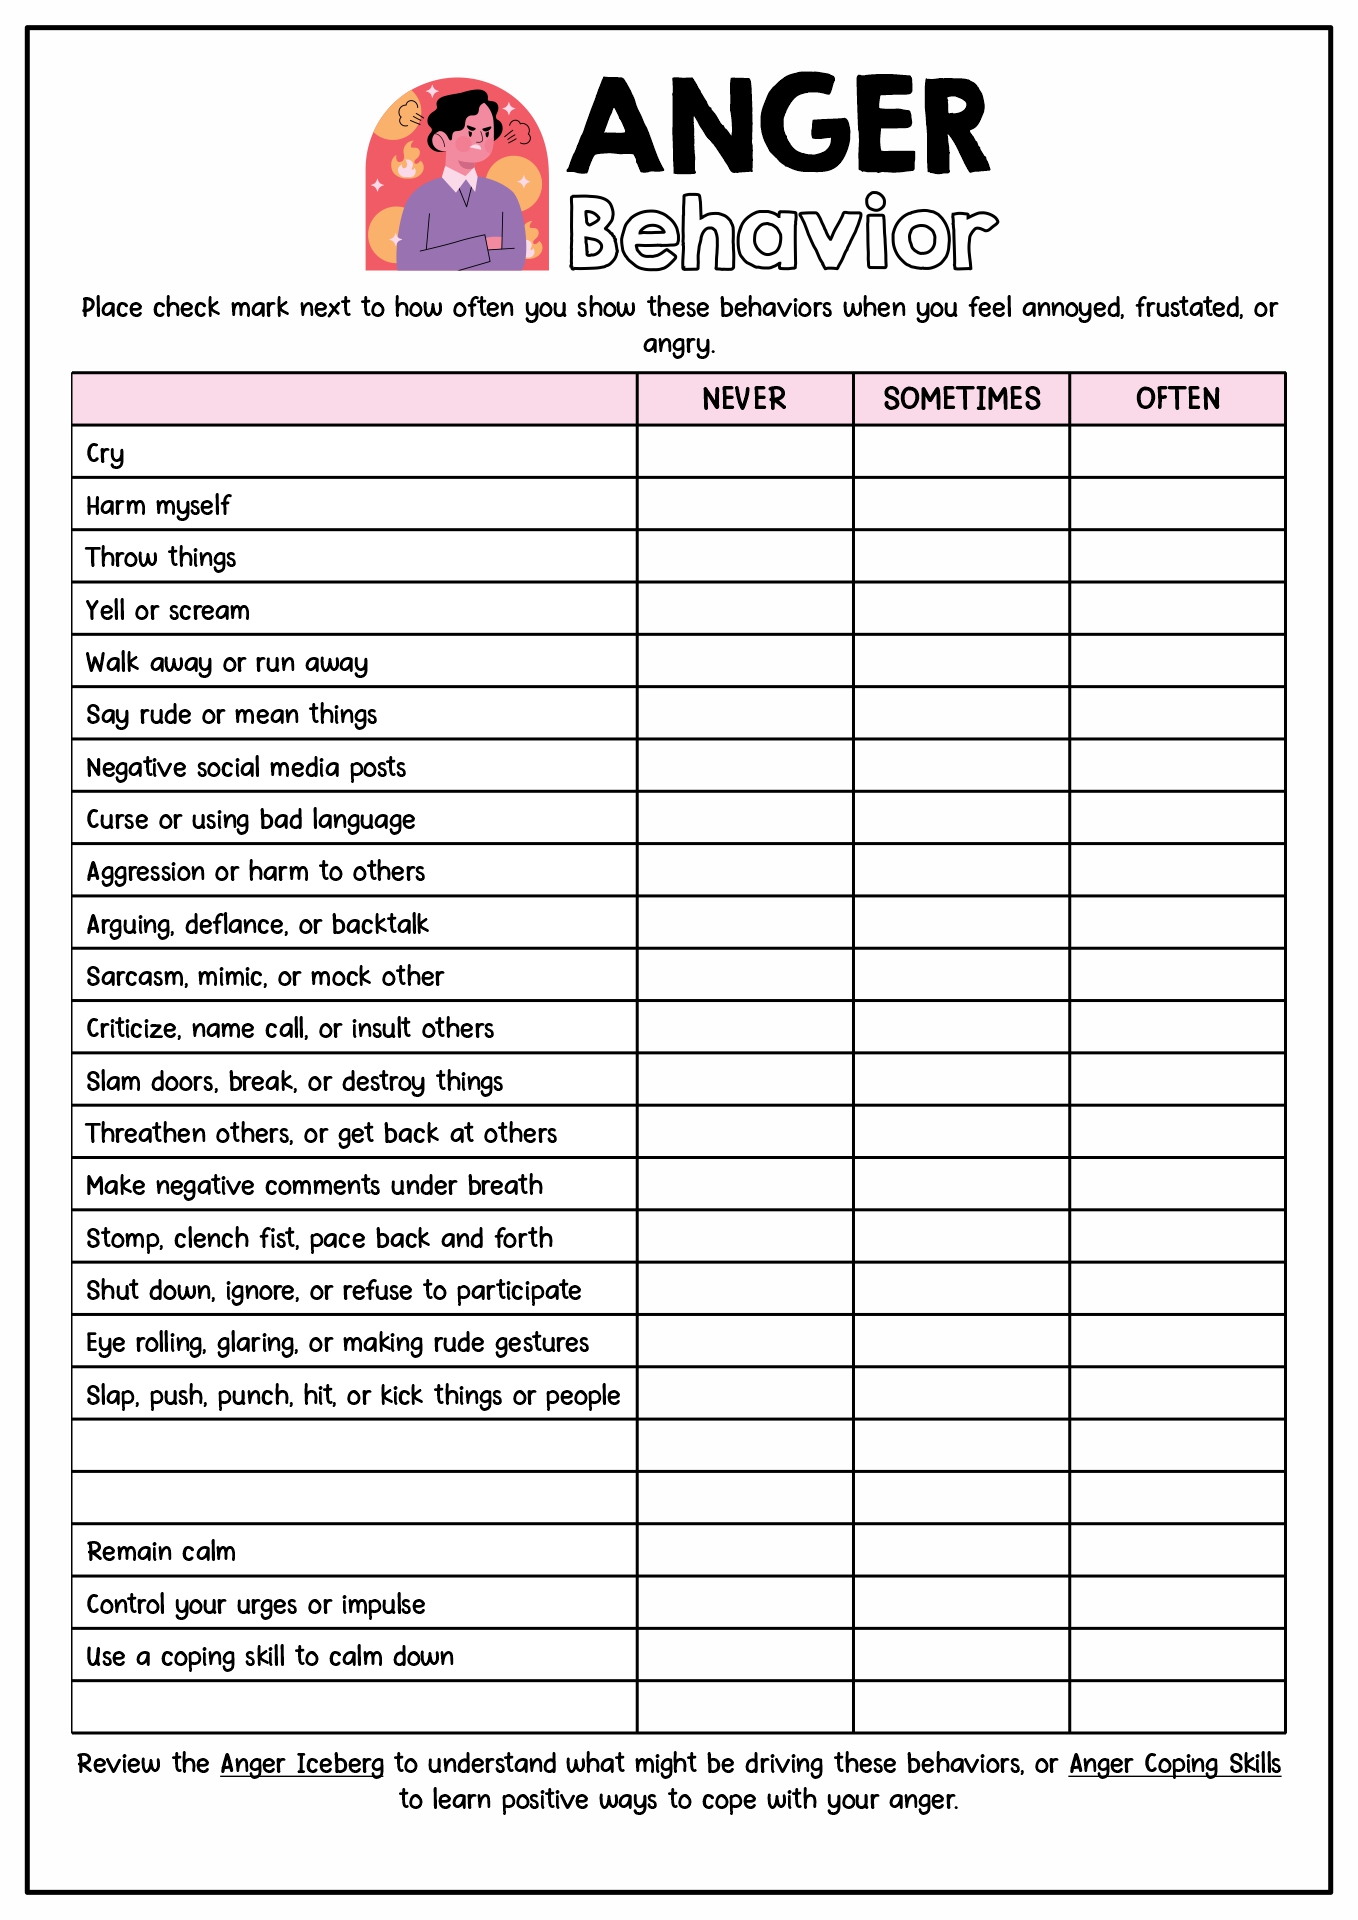 printable-anger-triggers-worksheet-customize-and-print